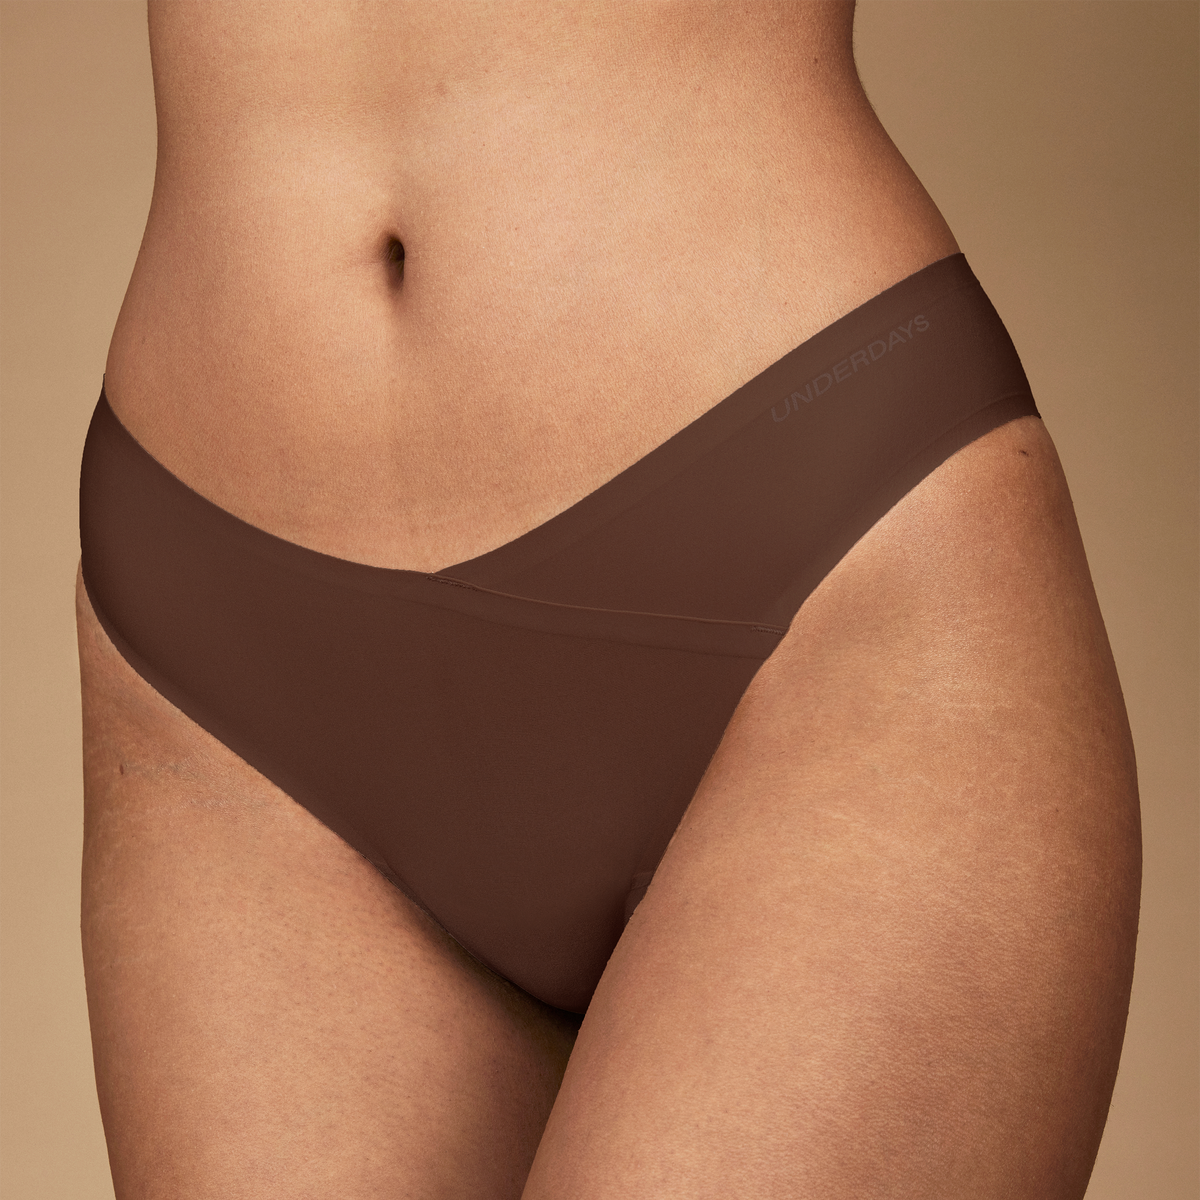 The Bare Basics Cheeky  Seamless and comfortable underwear